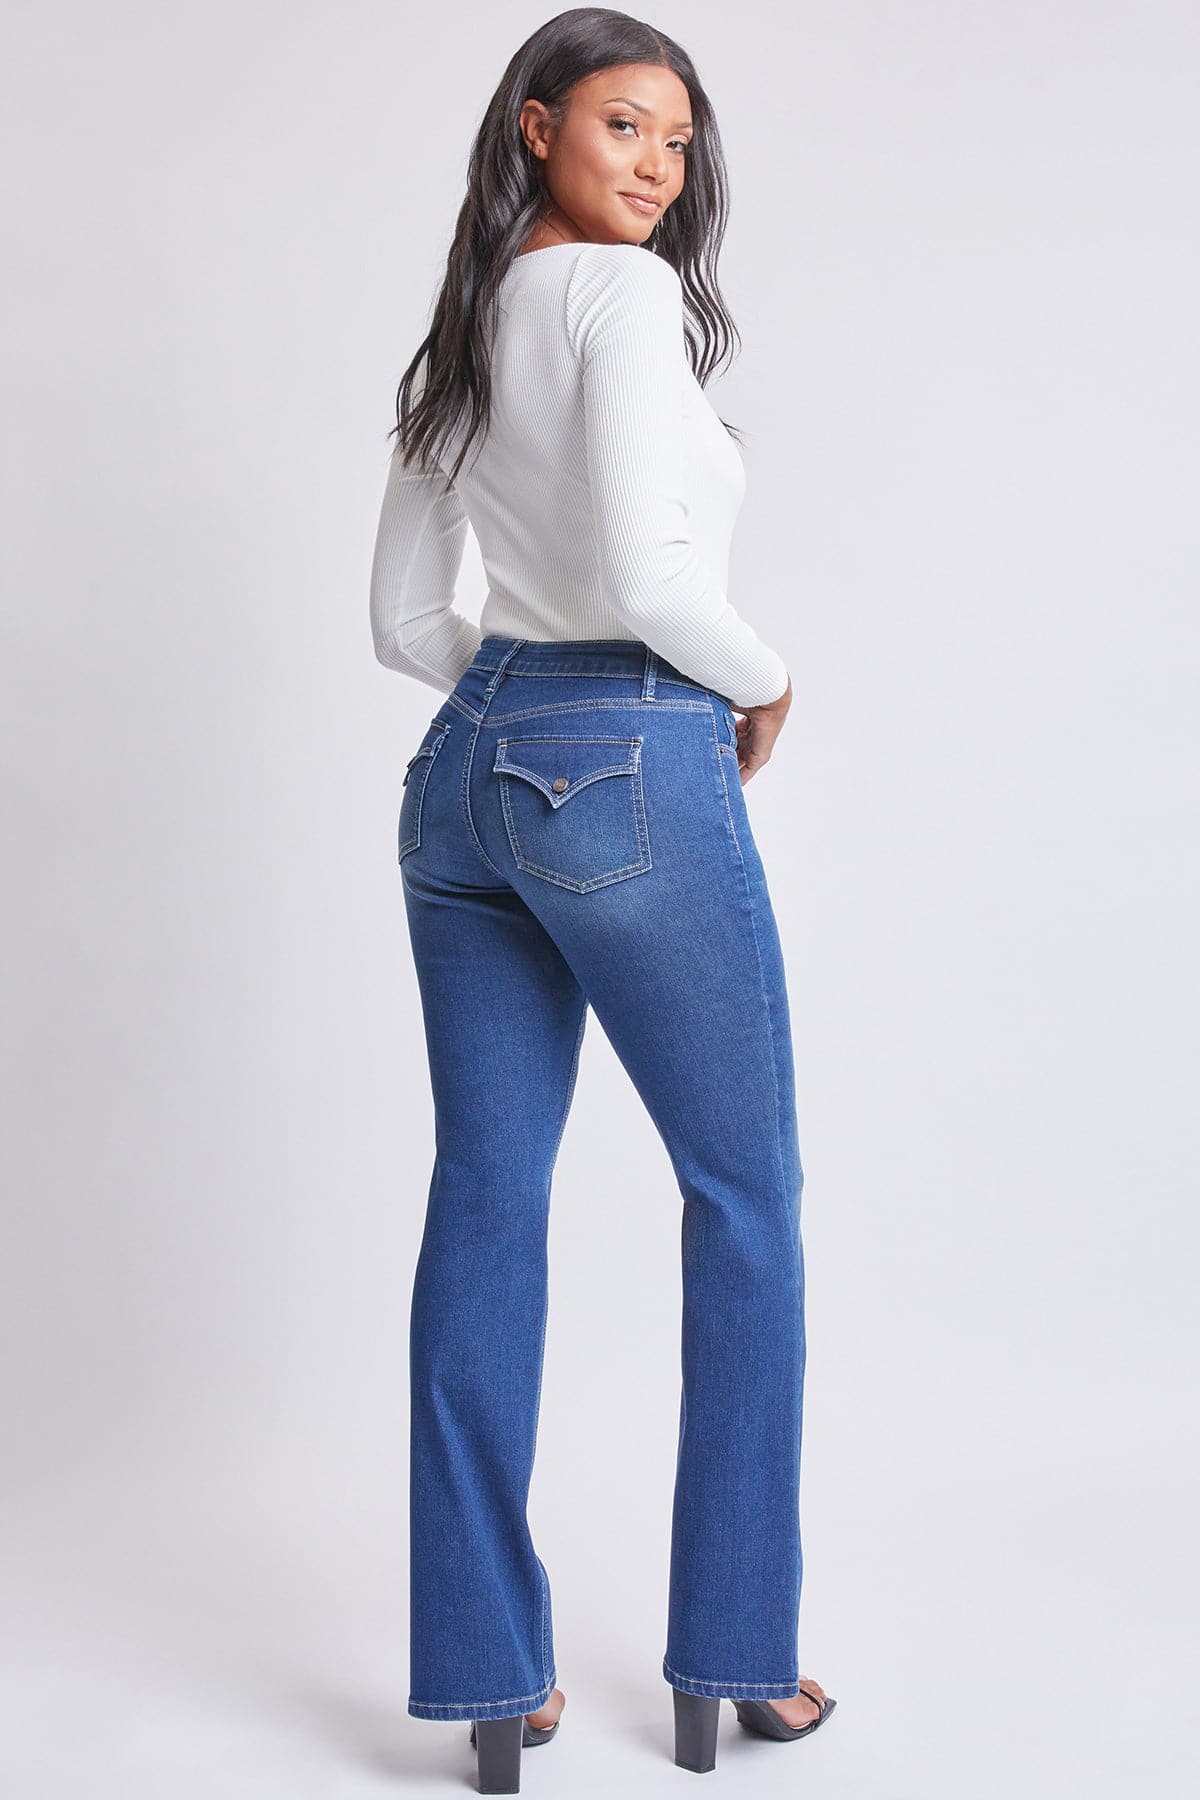 Women's Sustainable High Rise Flap Pocket Bootcut Jeans